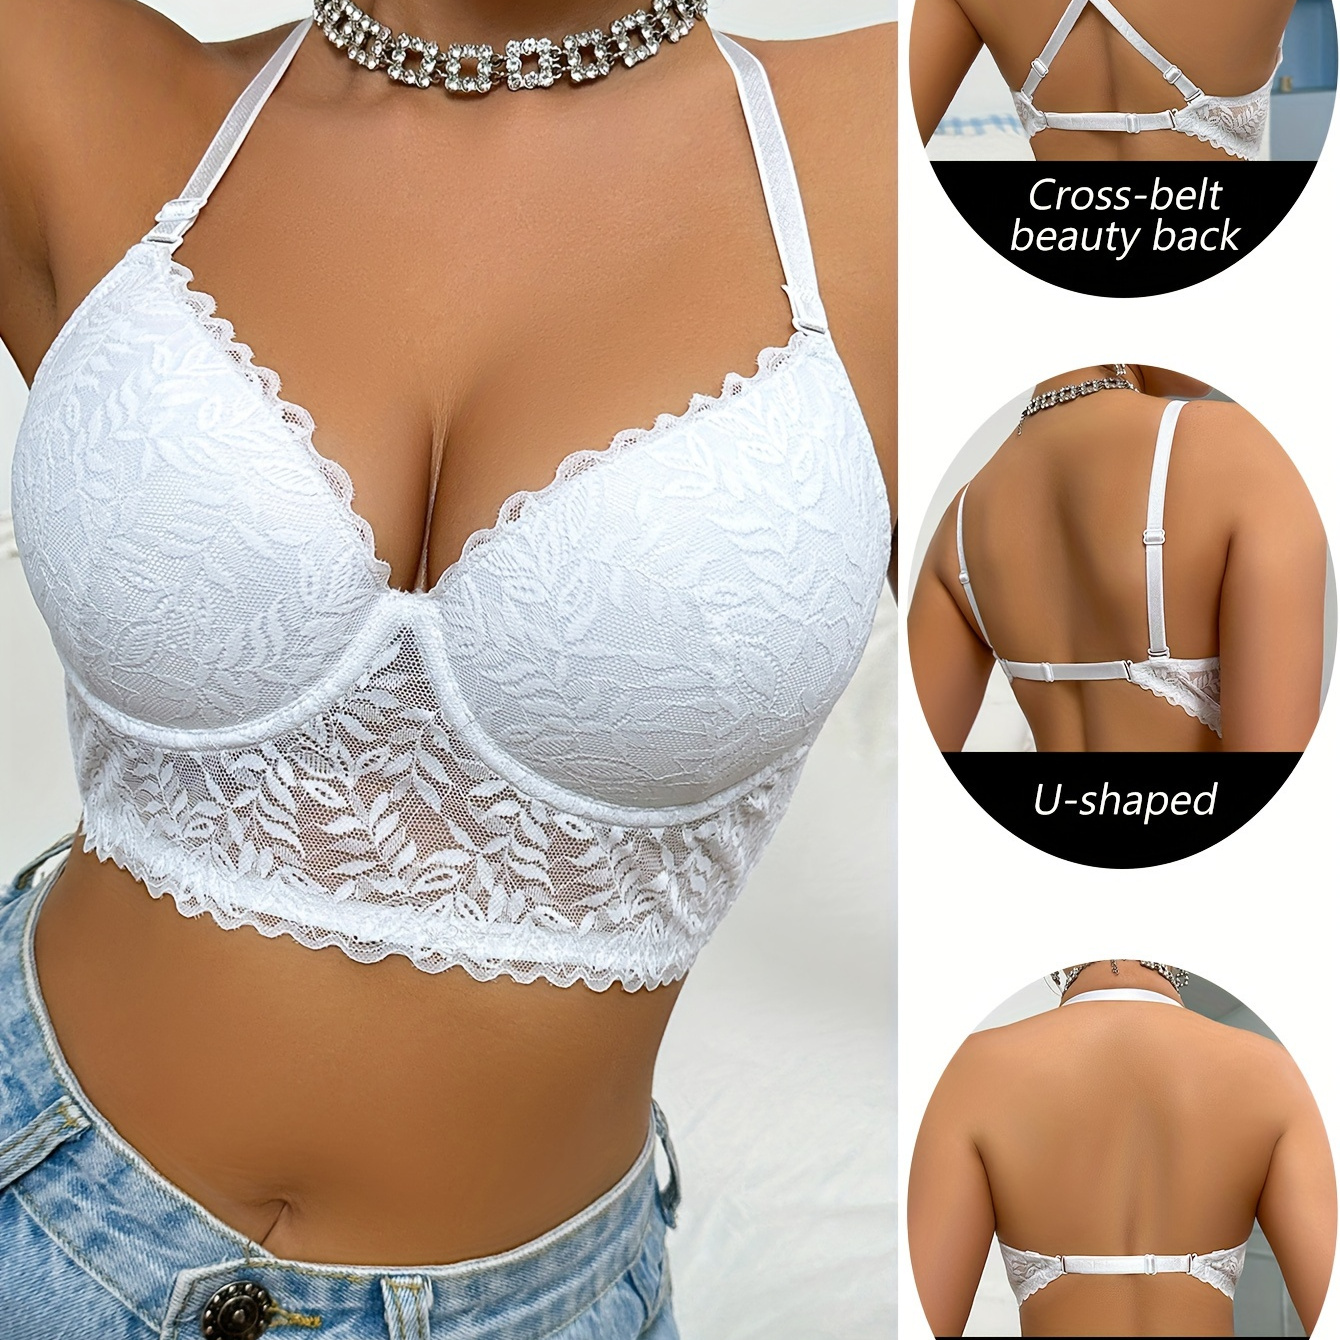 

Solid Scallop Trim Seamless Floral Lace Semi Sheer Underwire Bra, Sexy Comfy Push Up Bra, Women's Lingerie & Underwear